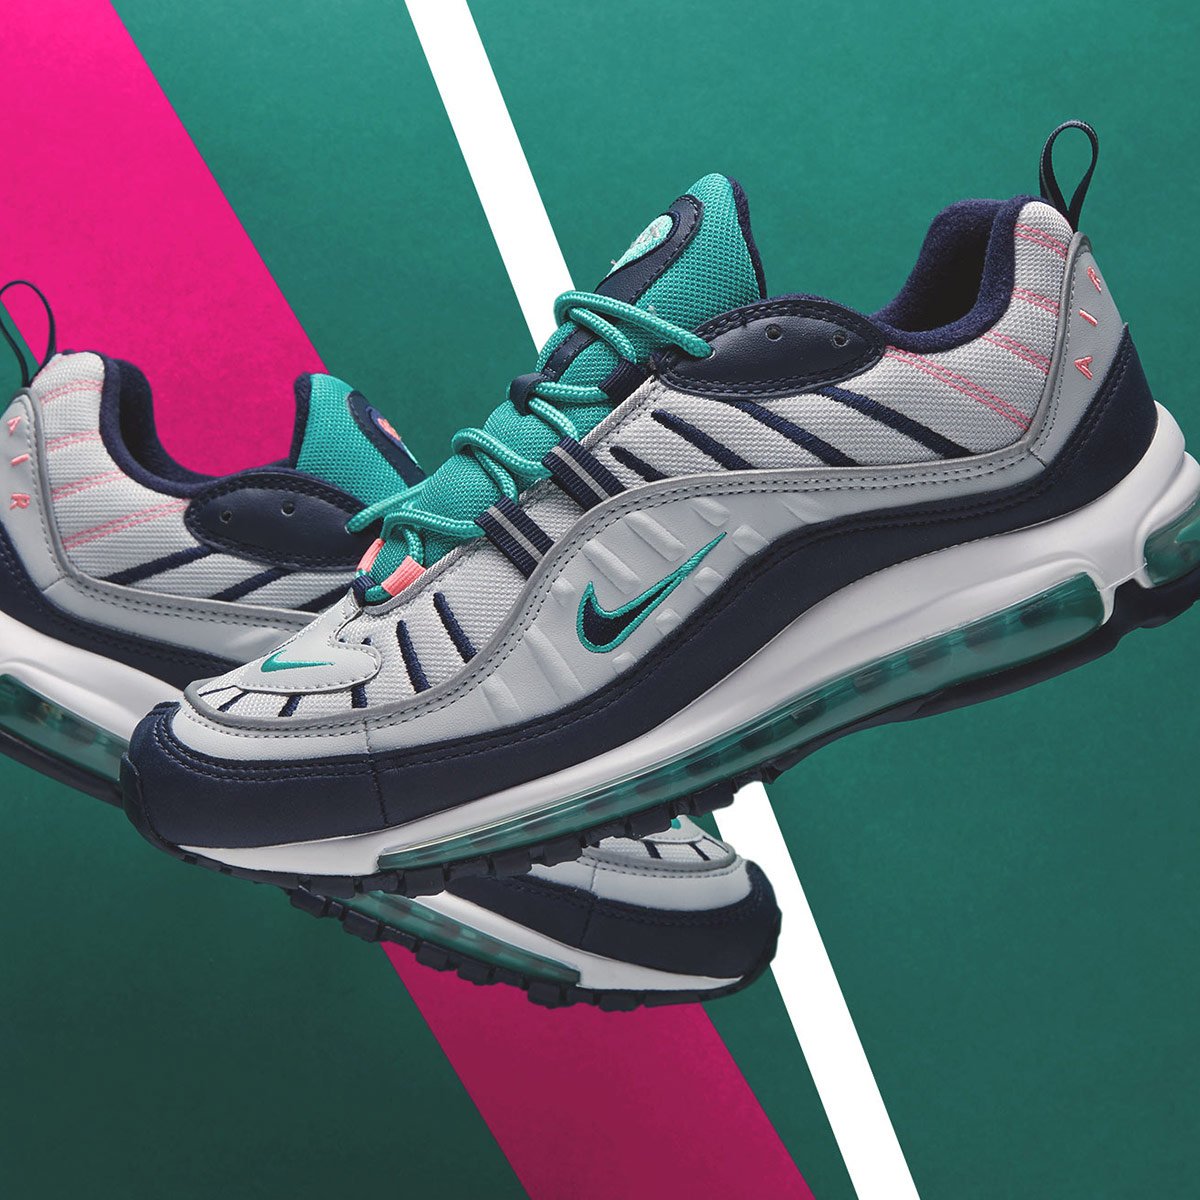 END. on Twitter: "Registration is now open for the @Nike Air Max 98 'Miami Vice' at https://t.co/6IgP5LxZsm. Draw May 10th at 00.01 BST. https://t.co/nCTvTiTDwT" / Twitter